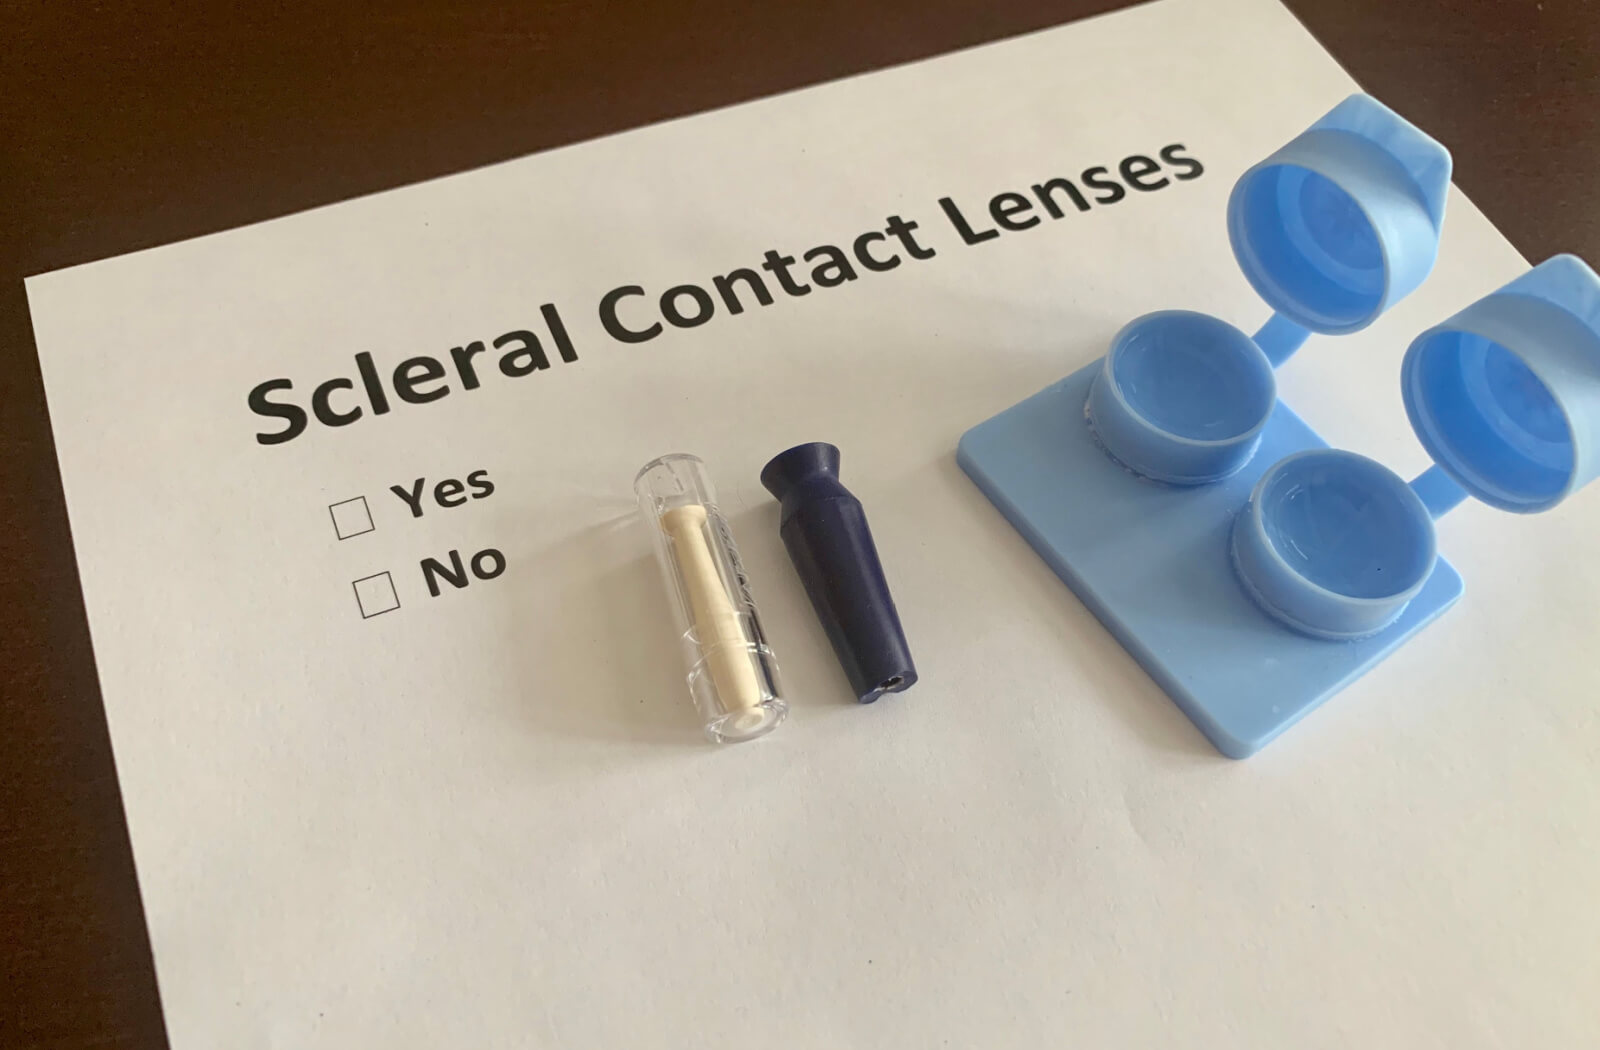 A contact lens case with scleral contacts and a contact lens insertion and removal kit on a piece of paper